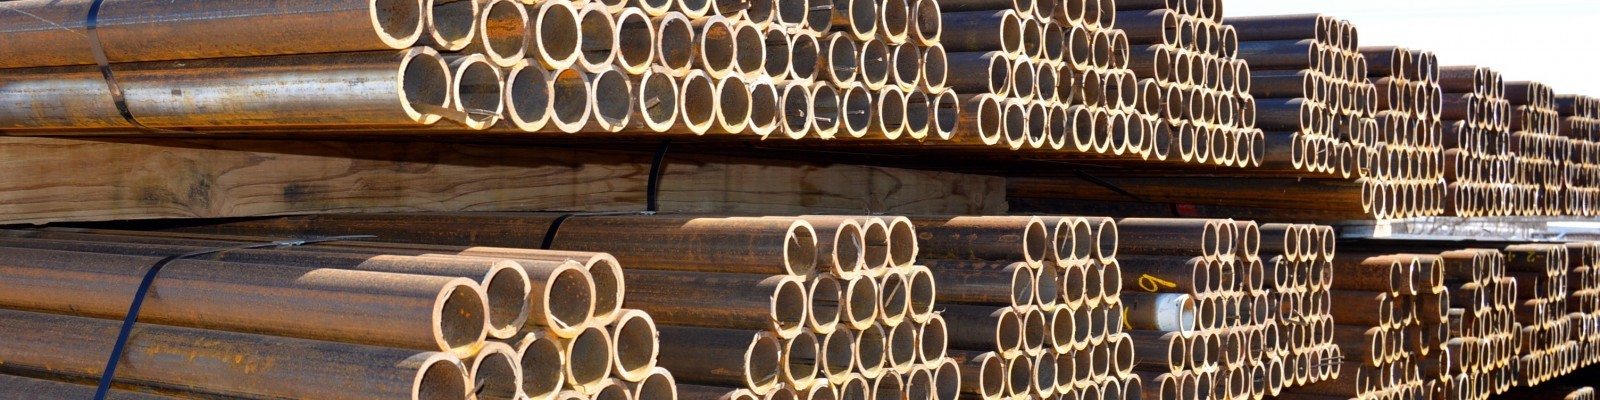 pre-cut fence posts providence pipe supply